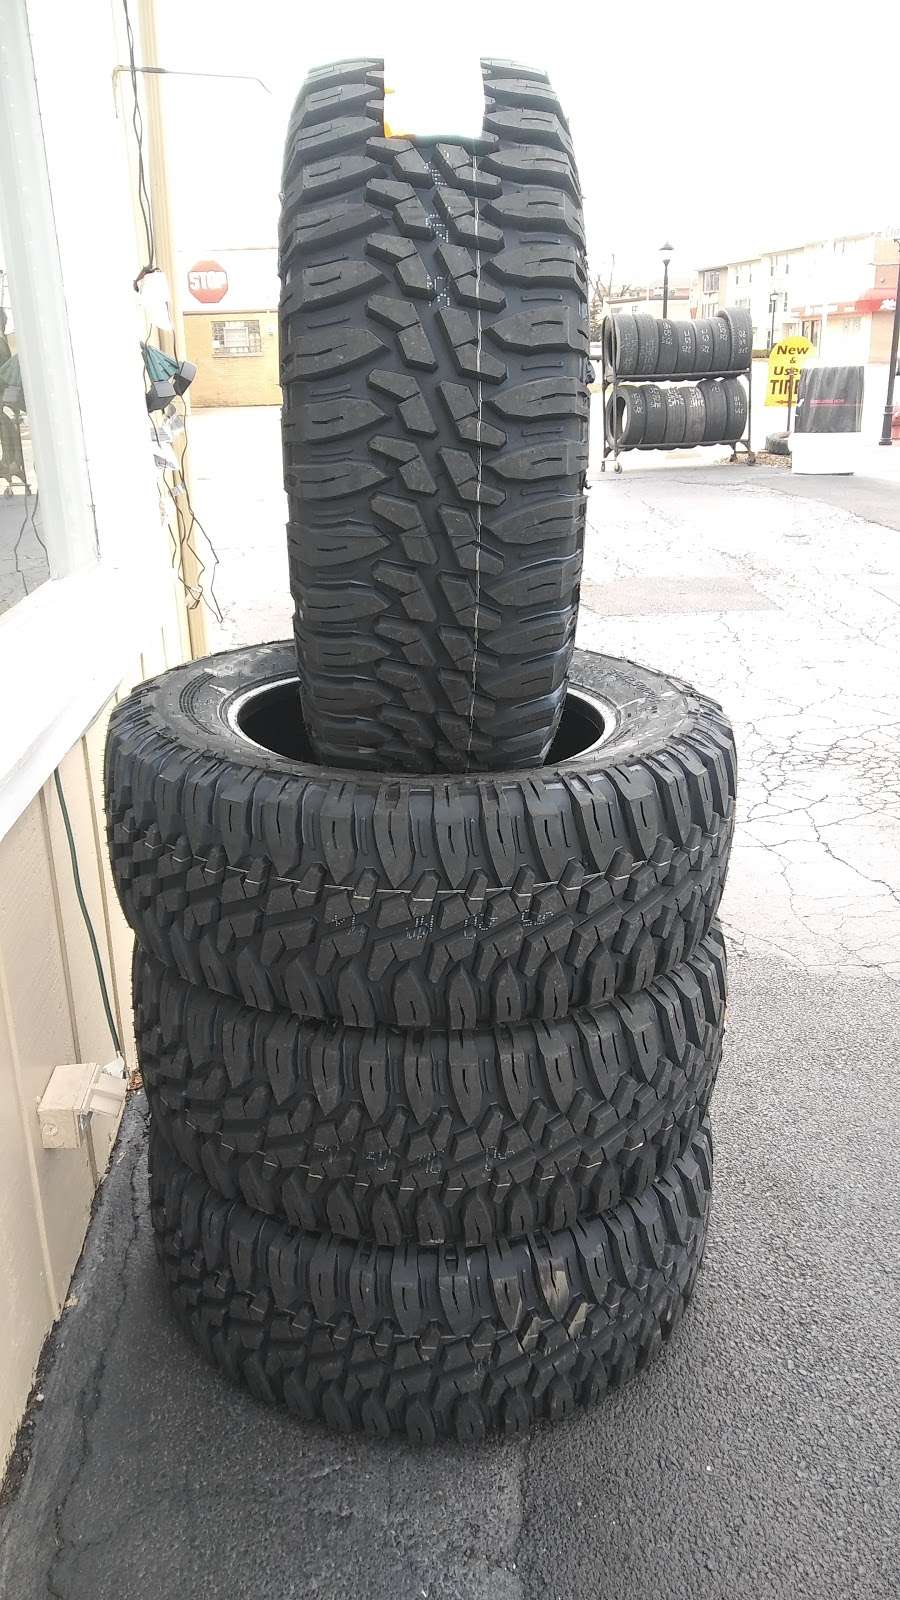 Junior Tires #2 New & Used tires | 8207 W Grand Ave, River Grove, IL 60171, United States | Phone: (708) 395-5755